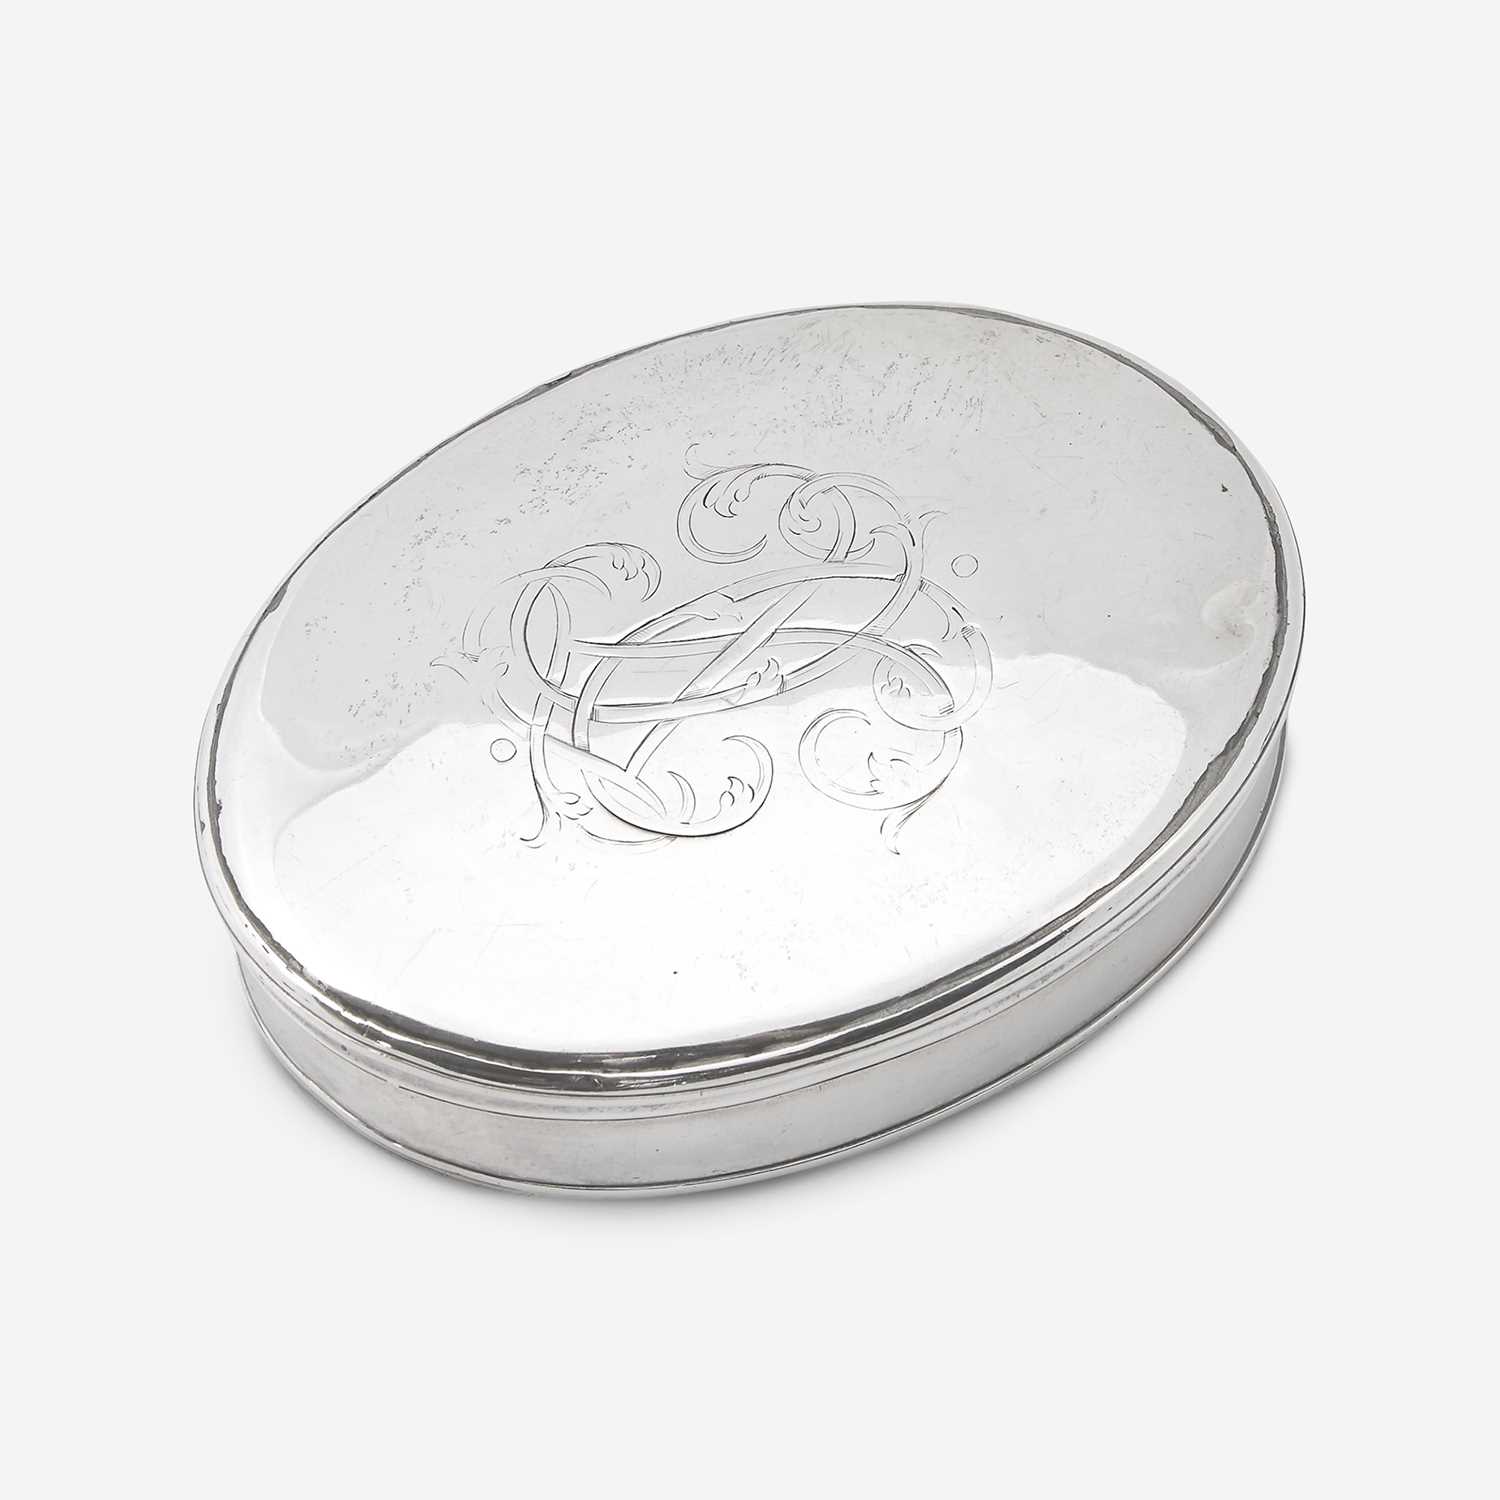 Lot 92 - A George I sterling silver snuff box owned by Thomas Chalkley (1675-1741)